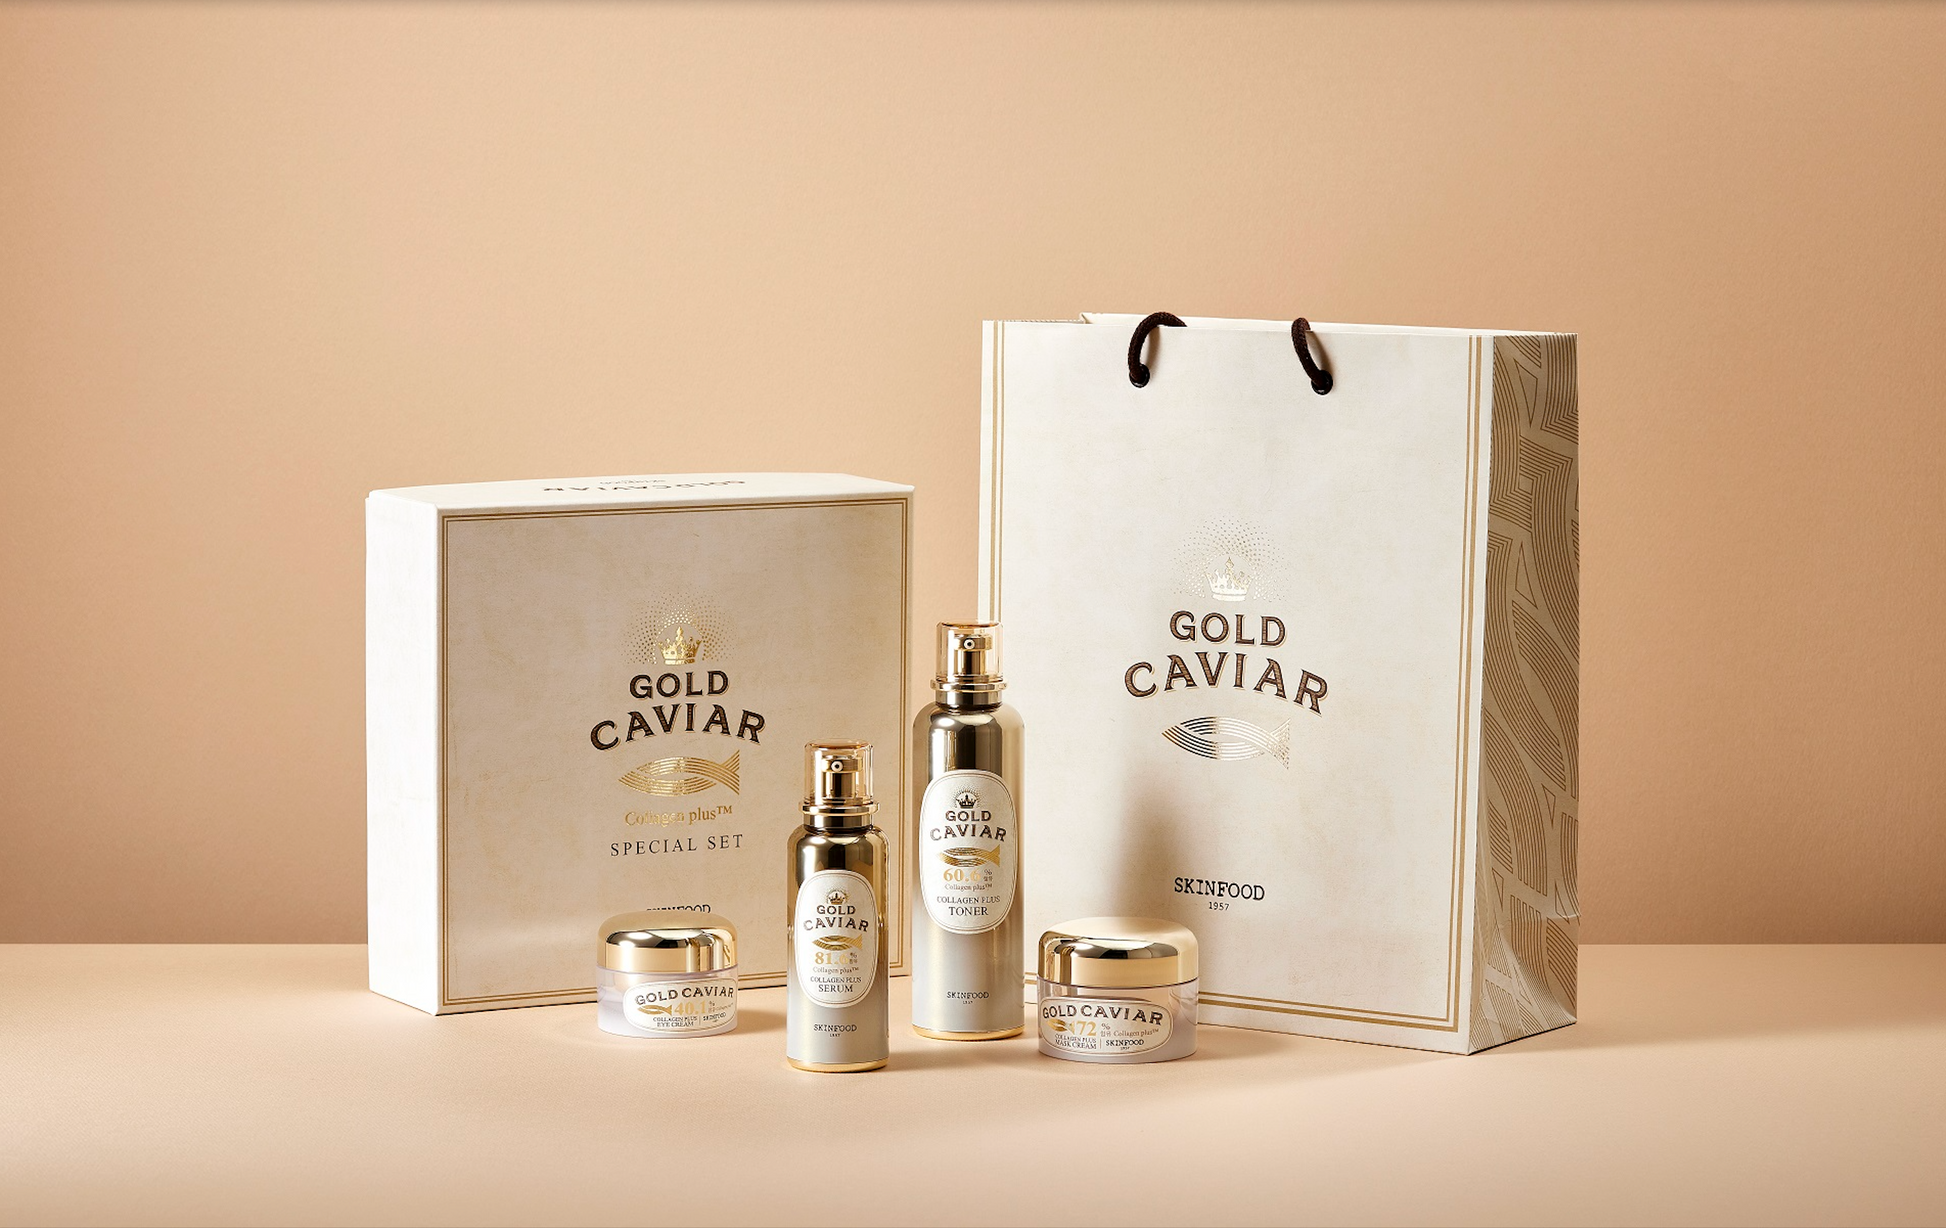 NEW] Gold Caviar Collagen Plus Special Set SF74205 – Skinfood